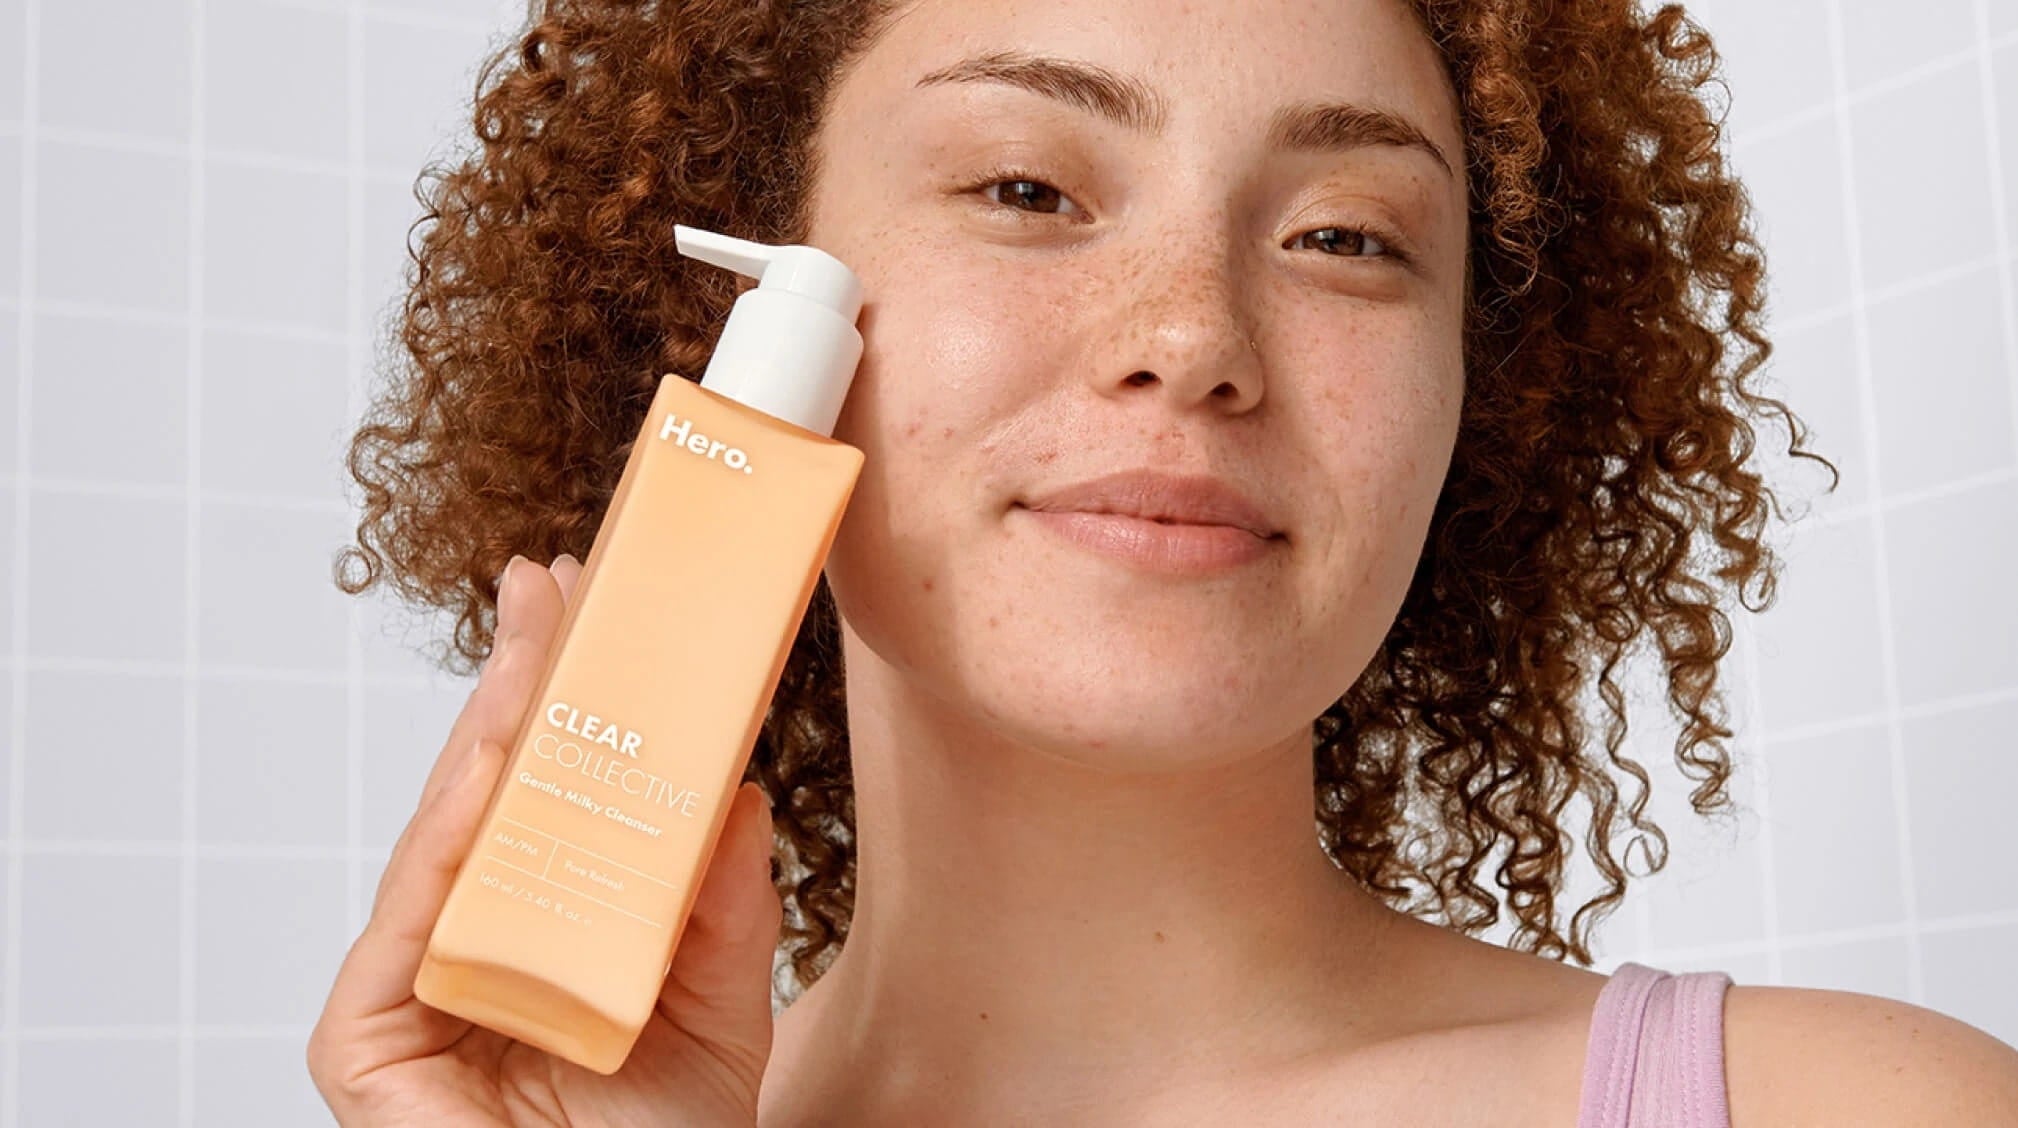 Clarifying & Calming, All at Once: Meet Gentle Milky Cleanser for Sensitive, Acne-Prone Skin